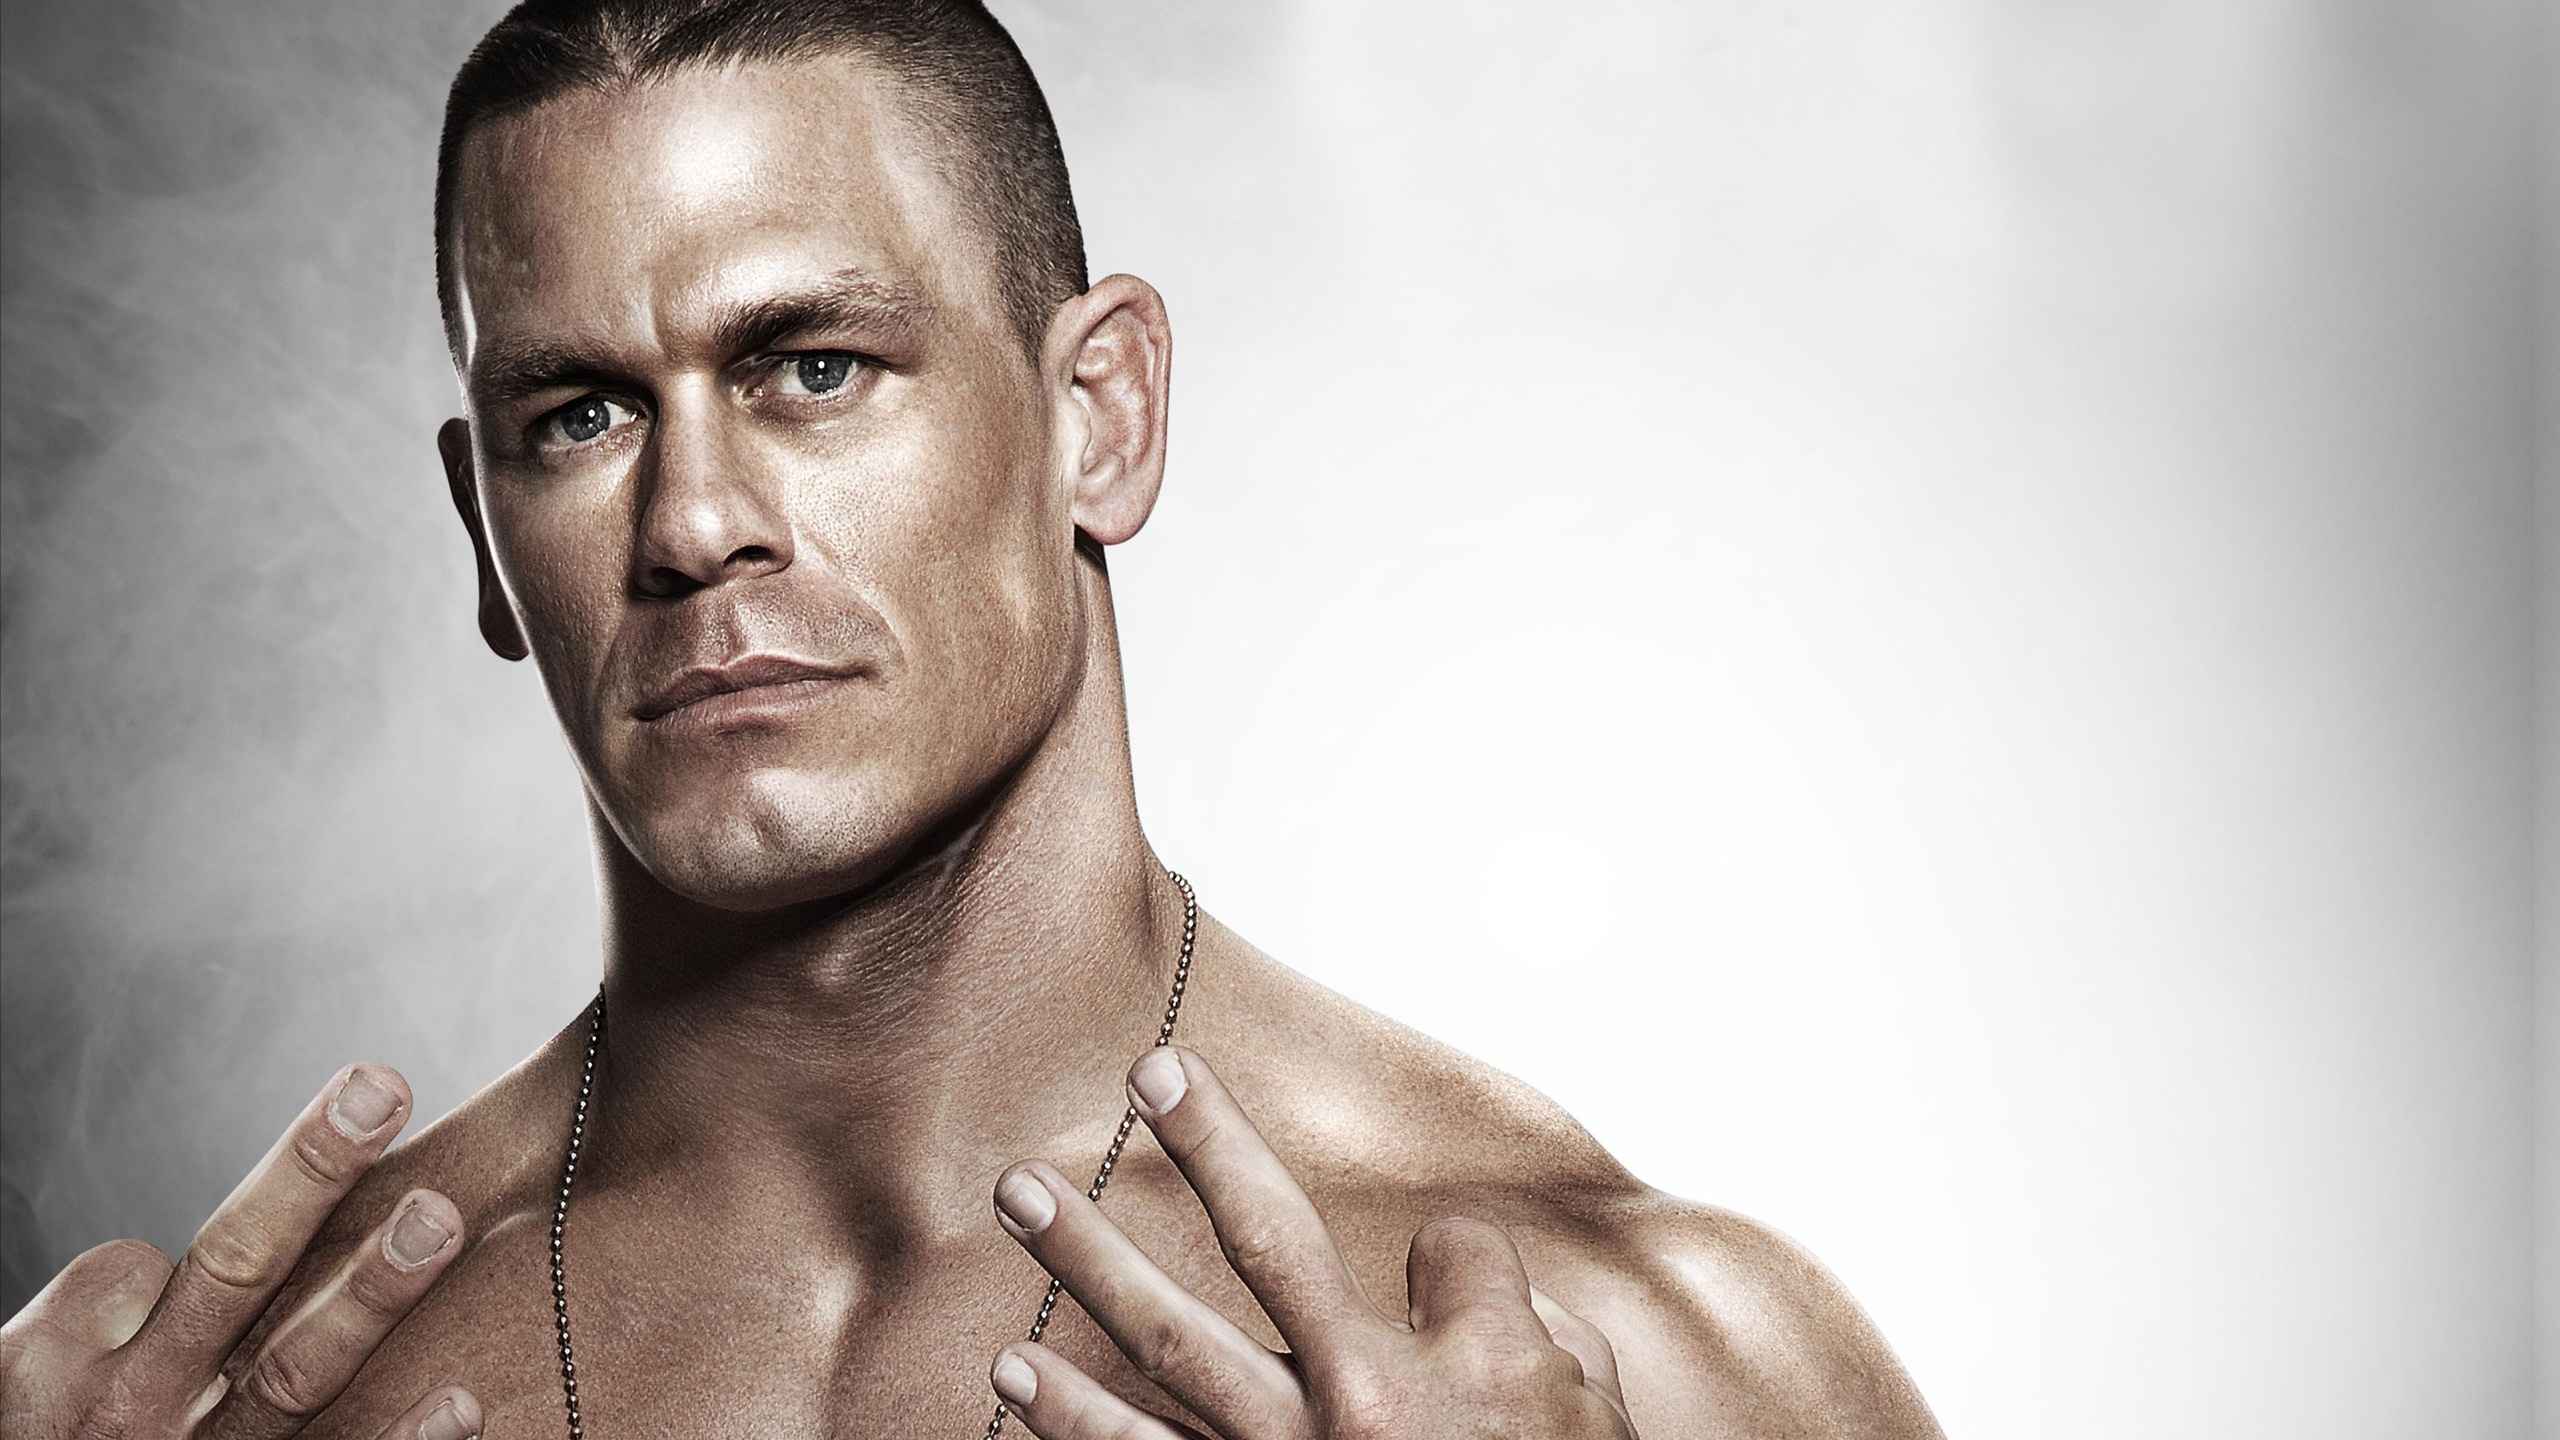 John Cena Wallpaper hd, Image and Photo Best Collection